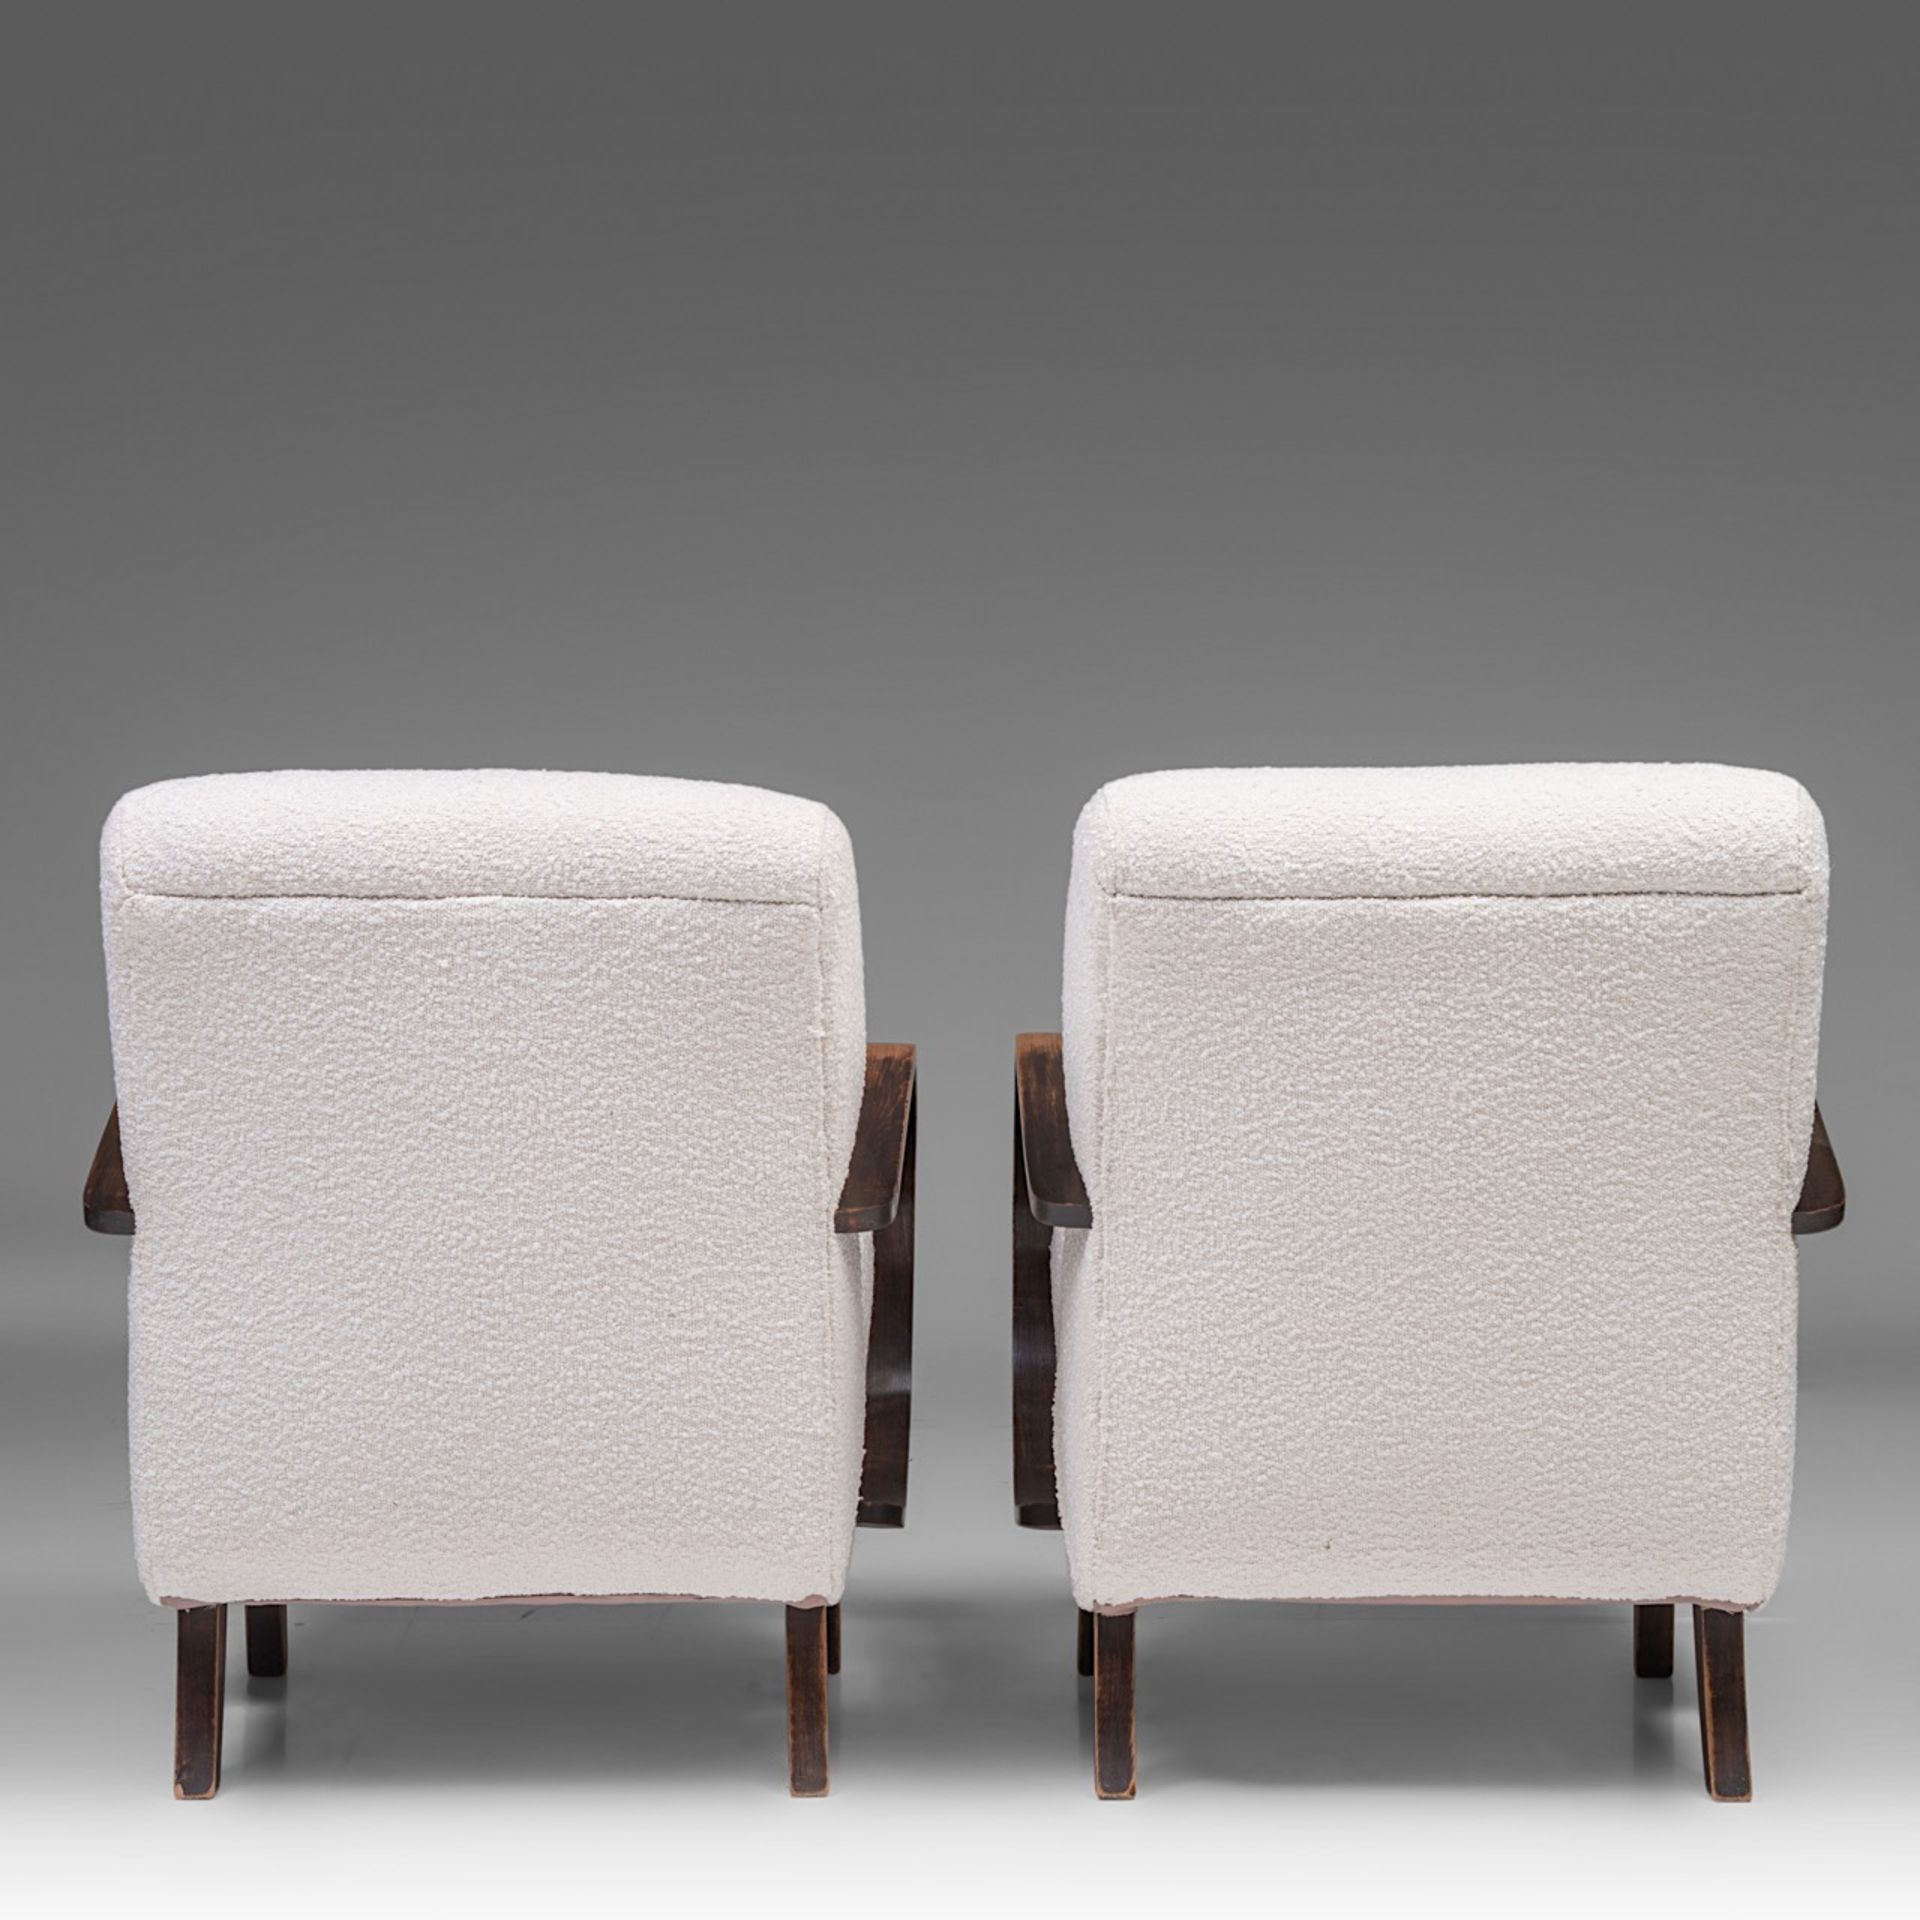 A pair of Mid-century Armchairs by Jindrich Halabala, 1950s 83 x 68 x 87 cm. (32.6 x 26.7 x 34 1/4 i - Image 5 of 13